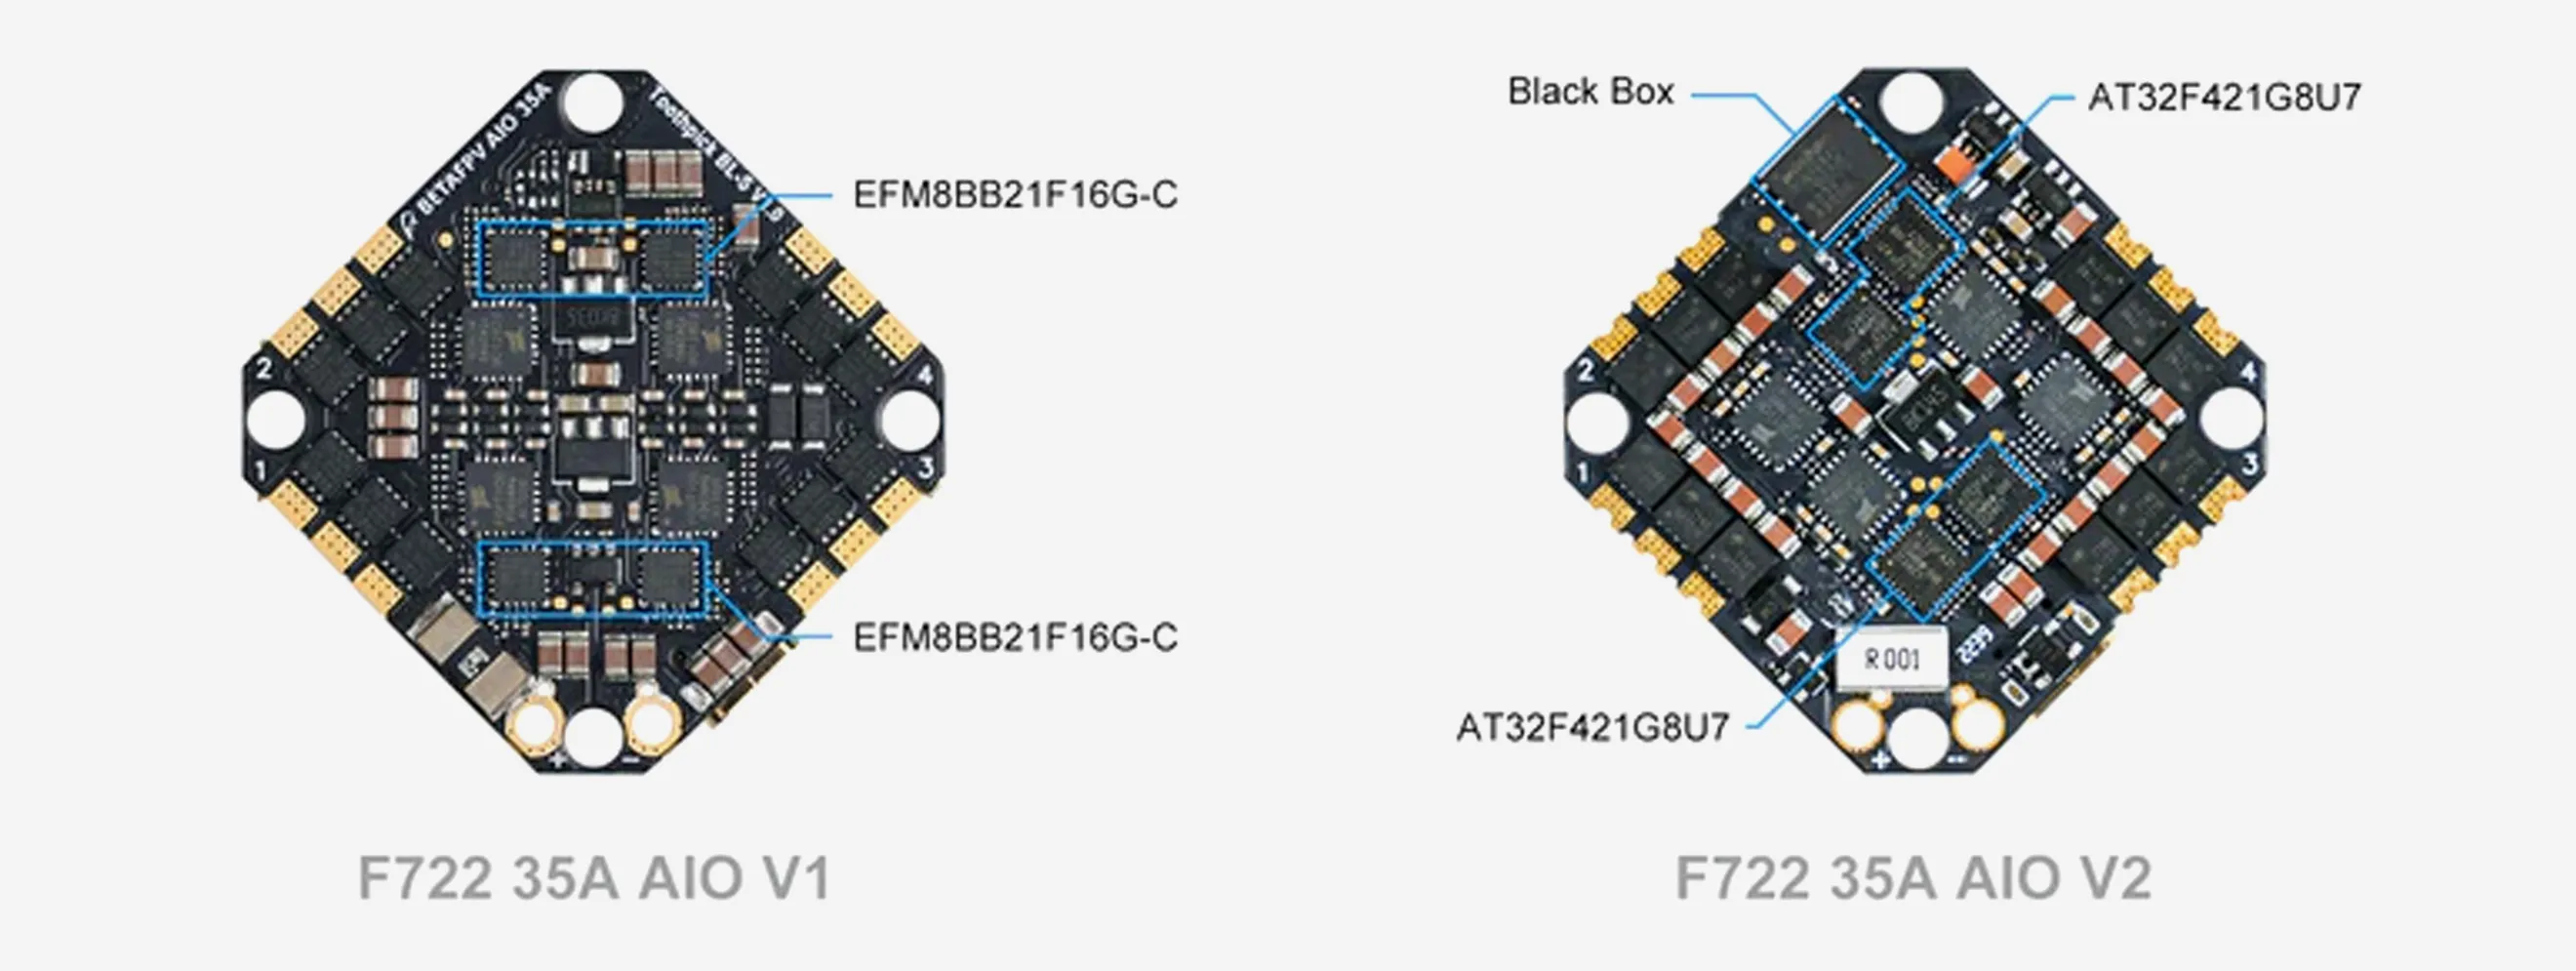 BetaFPV F722 35A AIO goes with V1 and V2 version